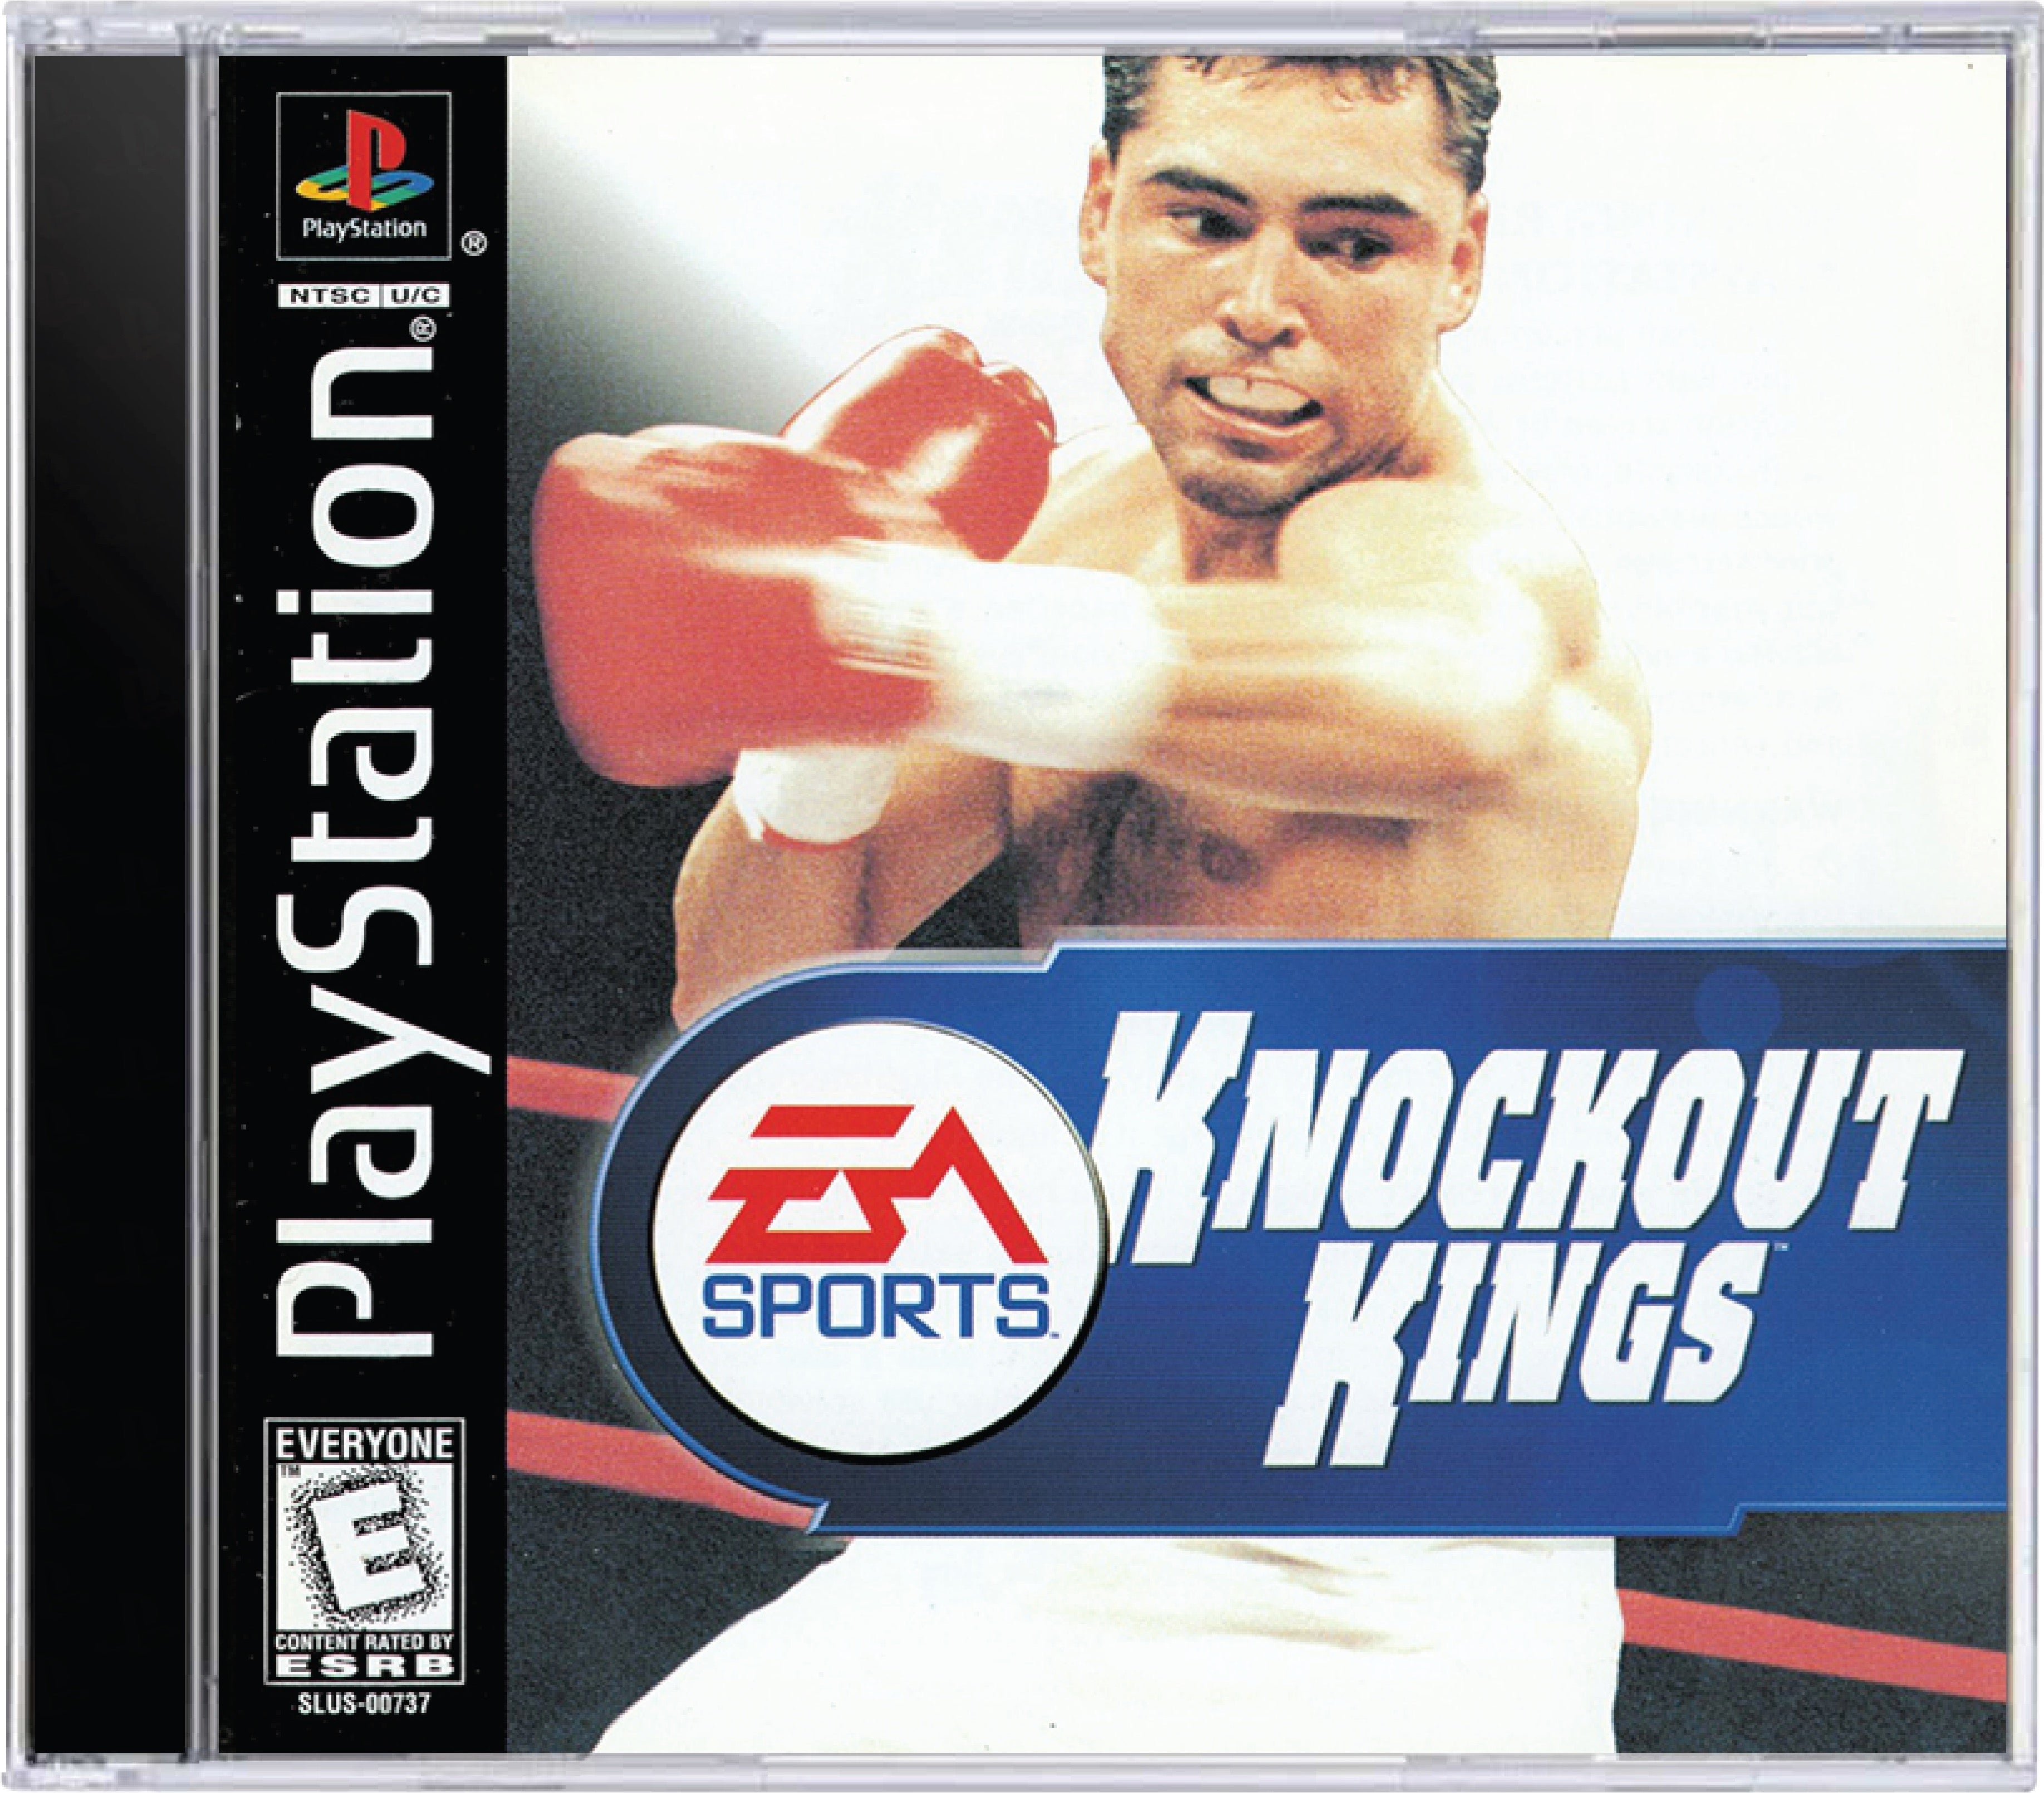 Knockout Kings Cover Art and Product Photo